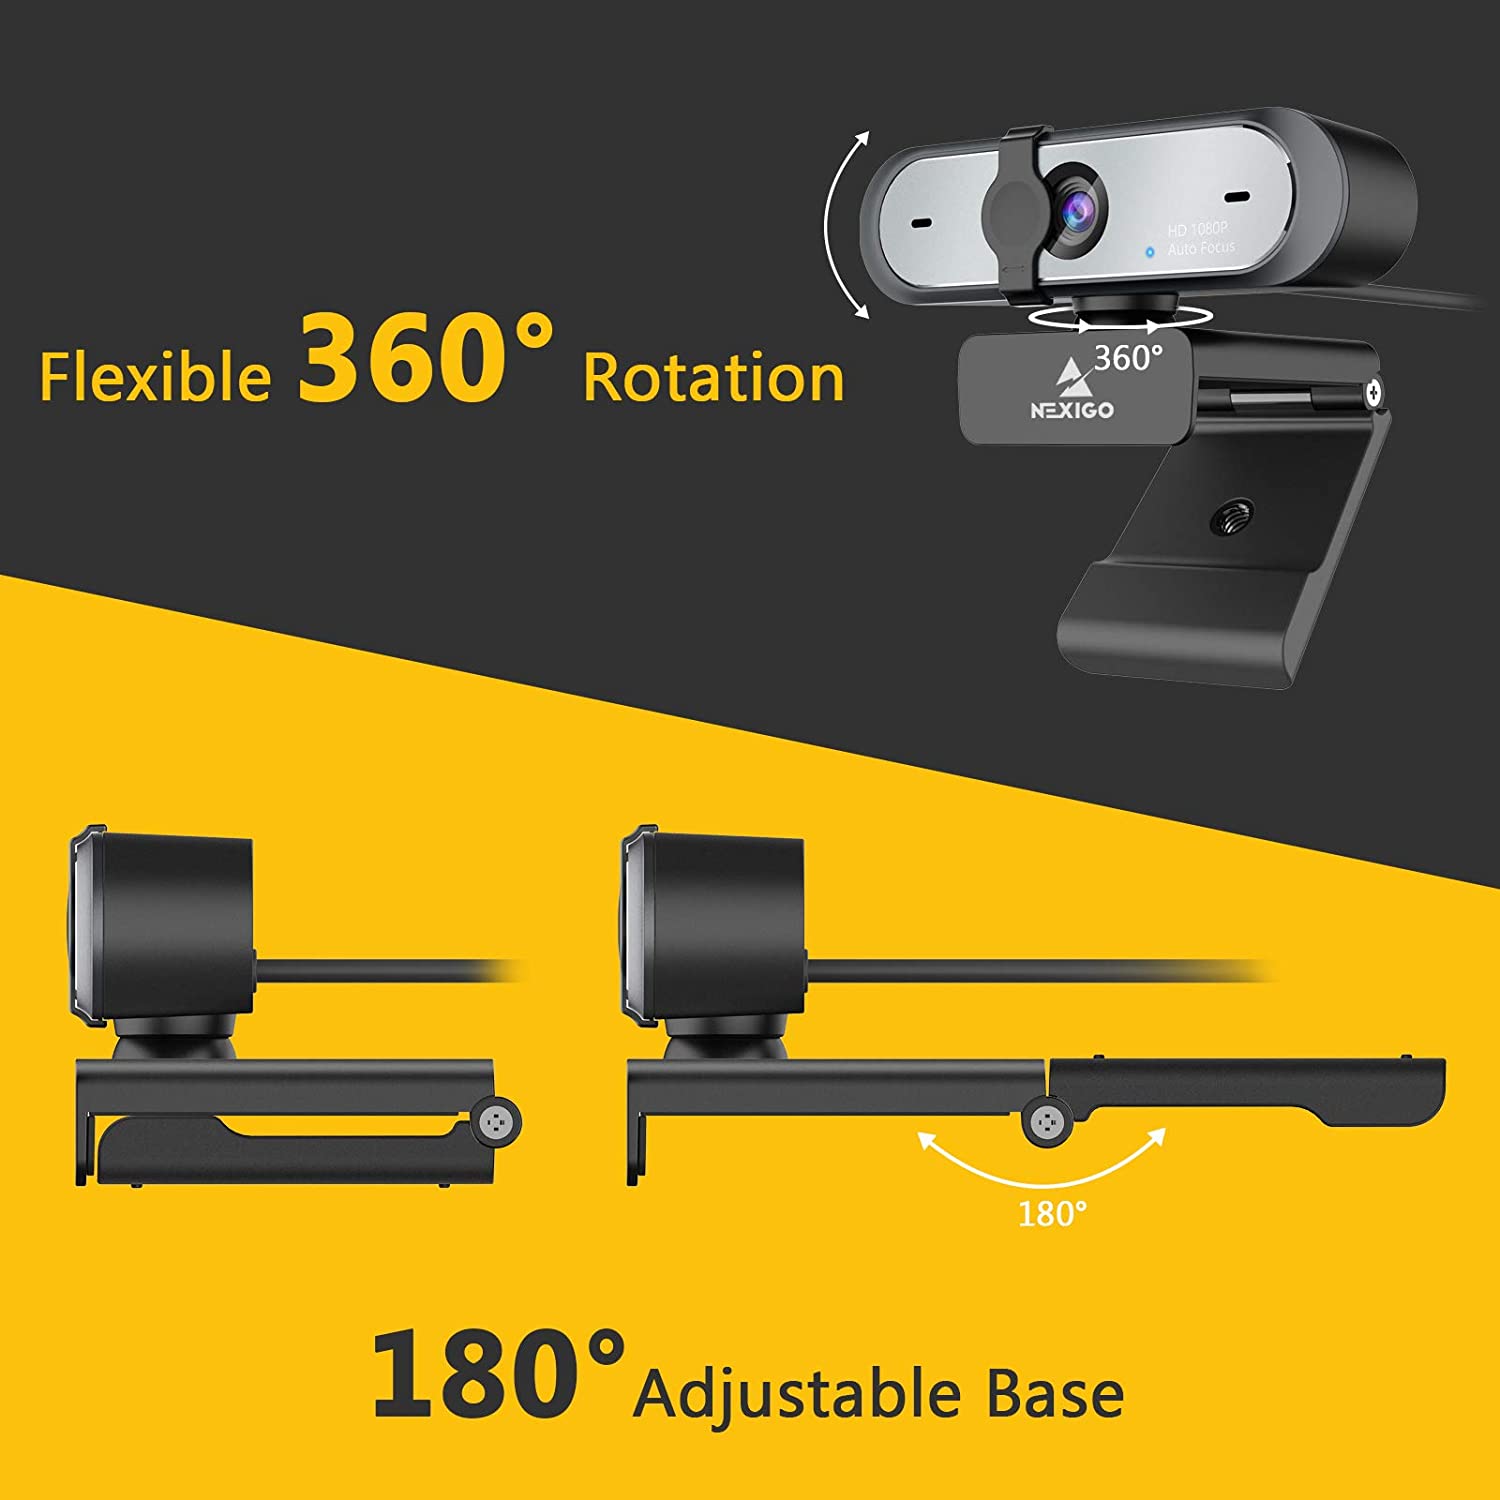 Webcam rotates 360 degree left/right; webcam clip can open up to 180 degree.